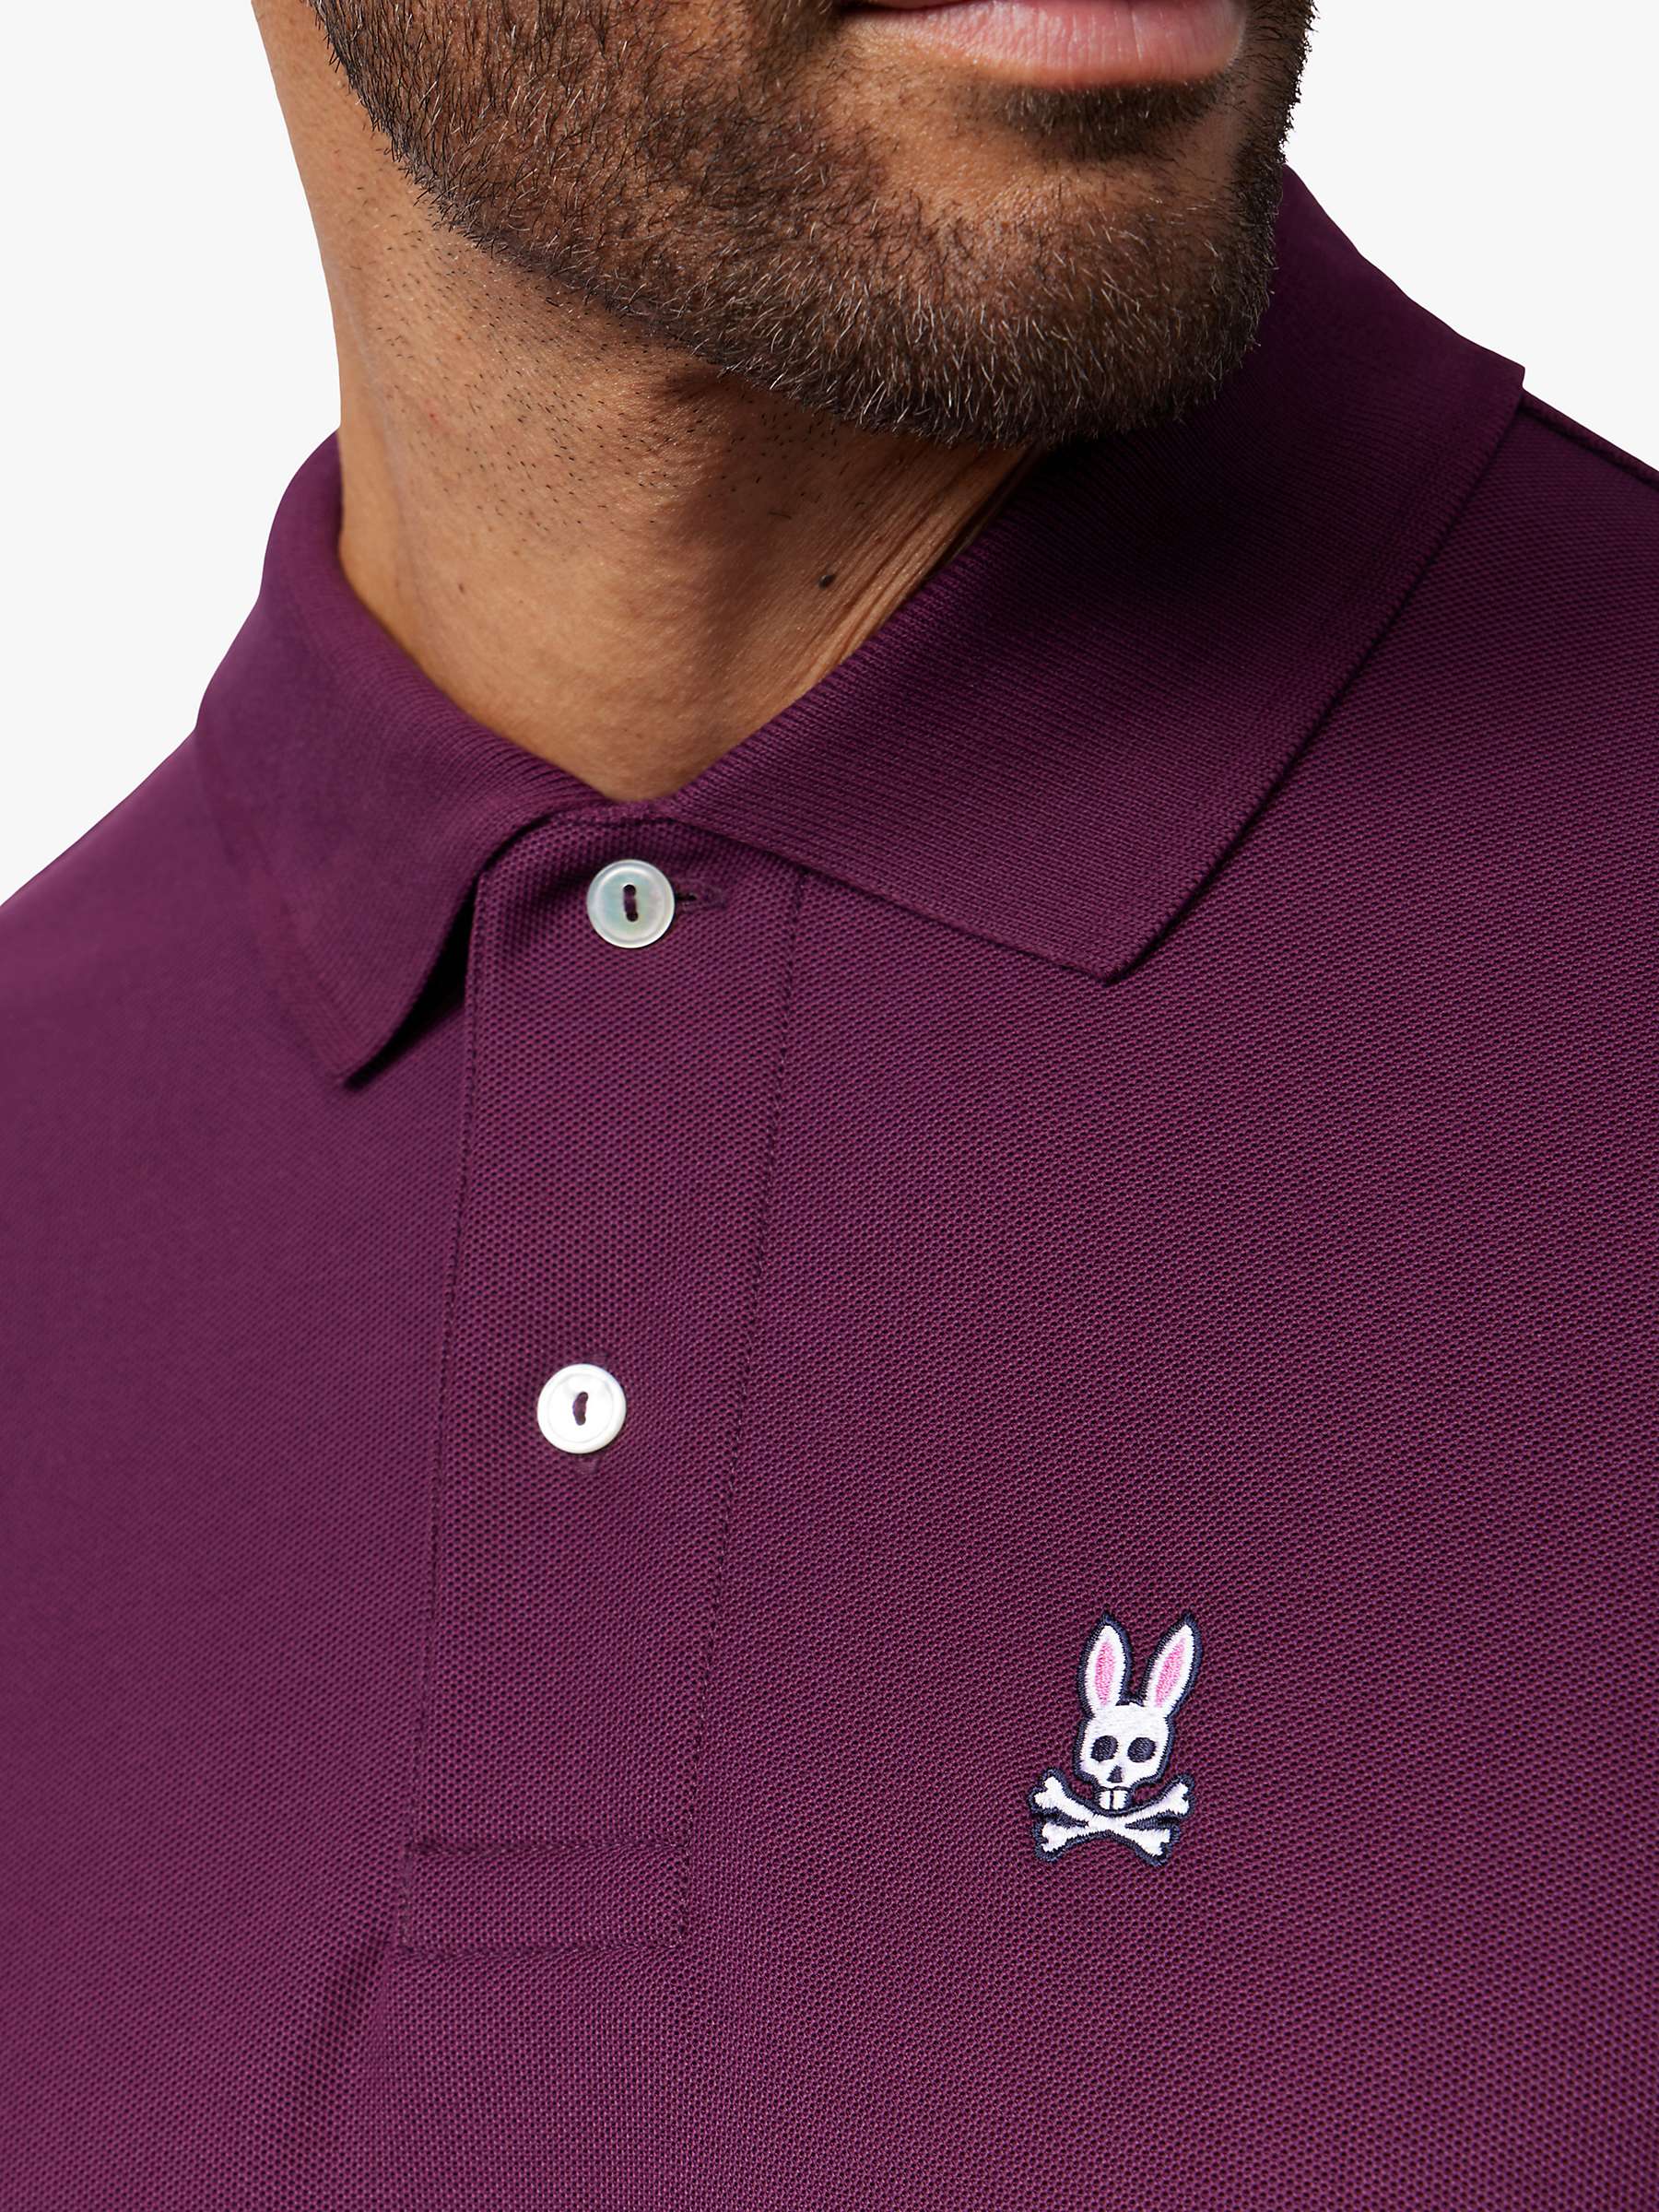 Buy Psycho Bunny Classic Pique Polo Shirt Online at johnlewis.com